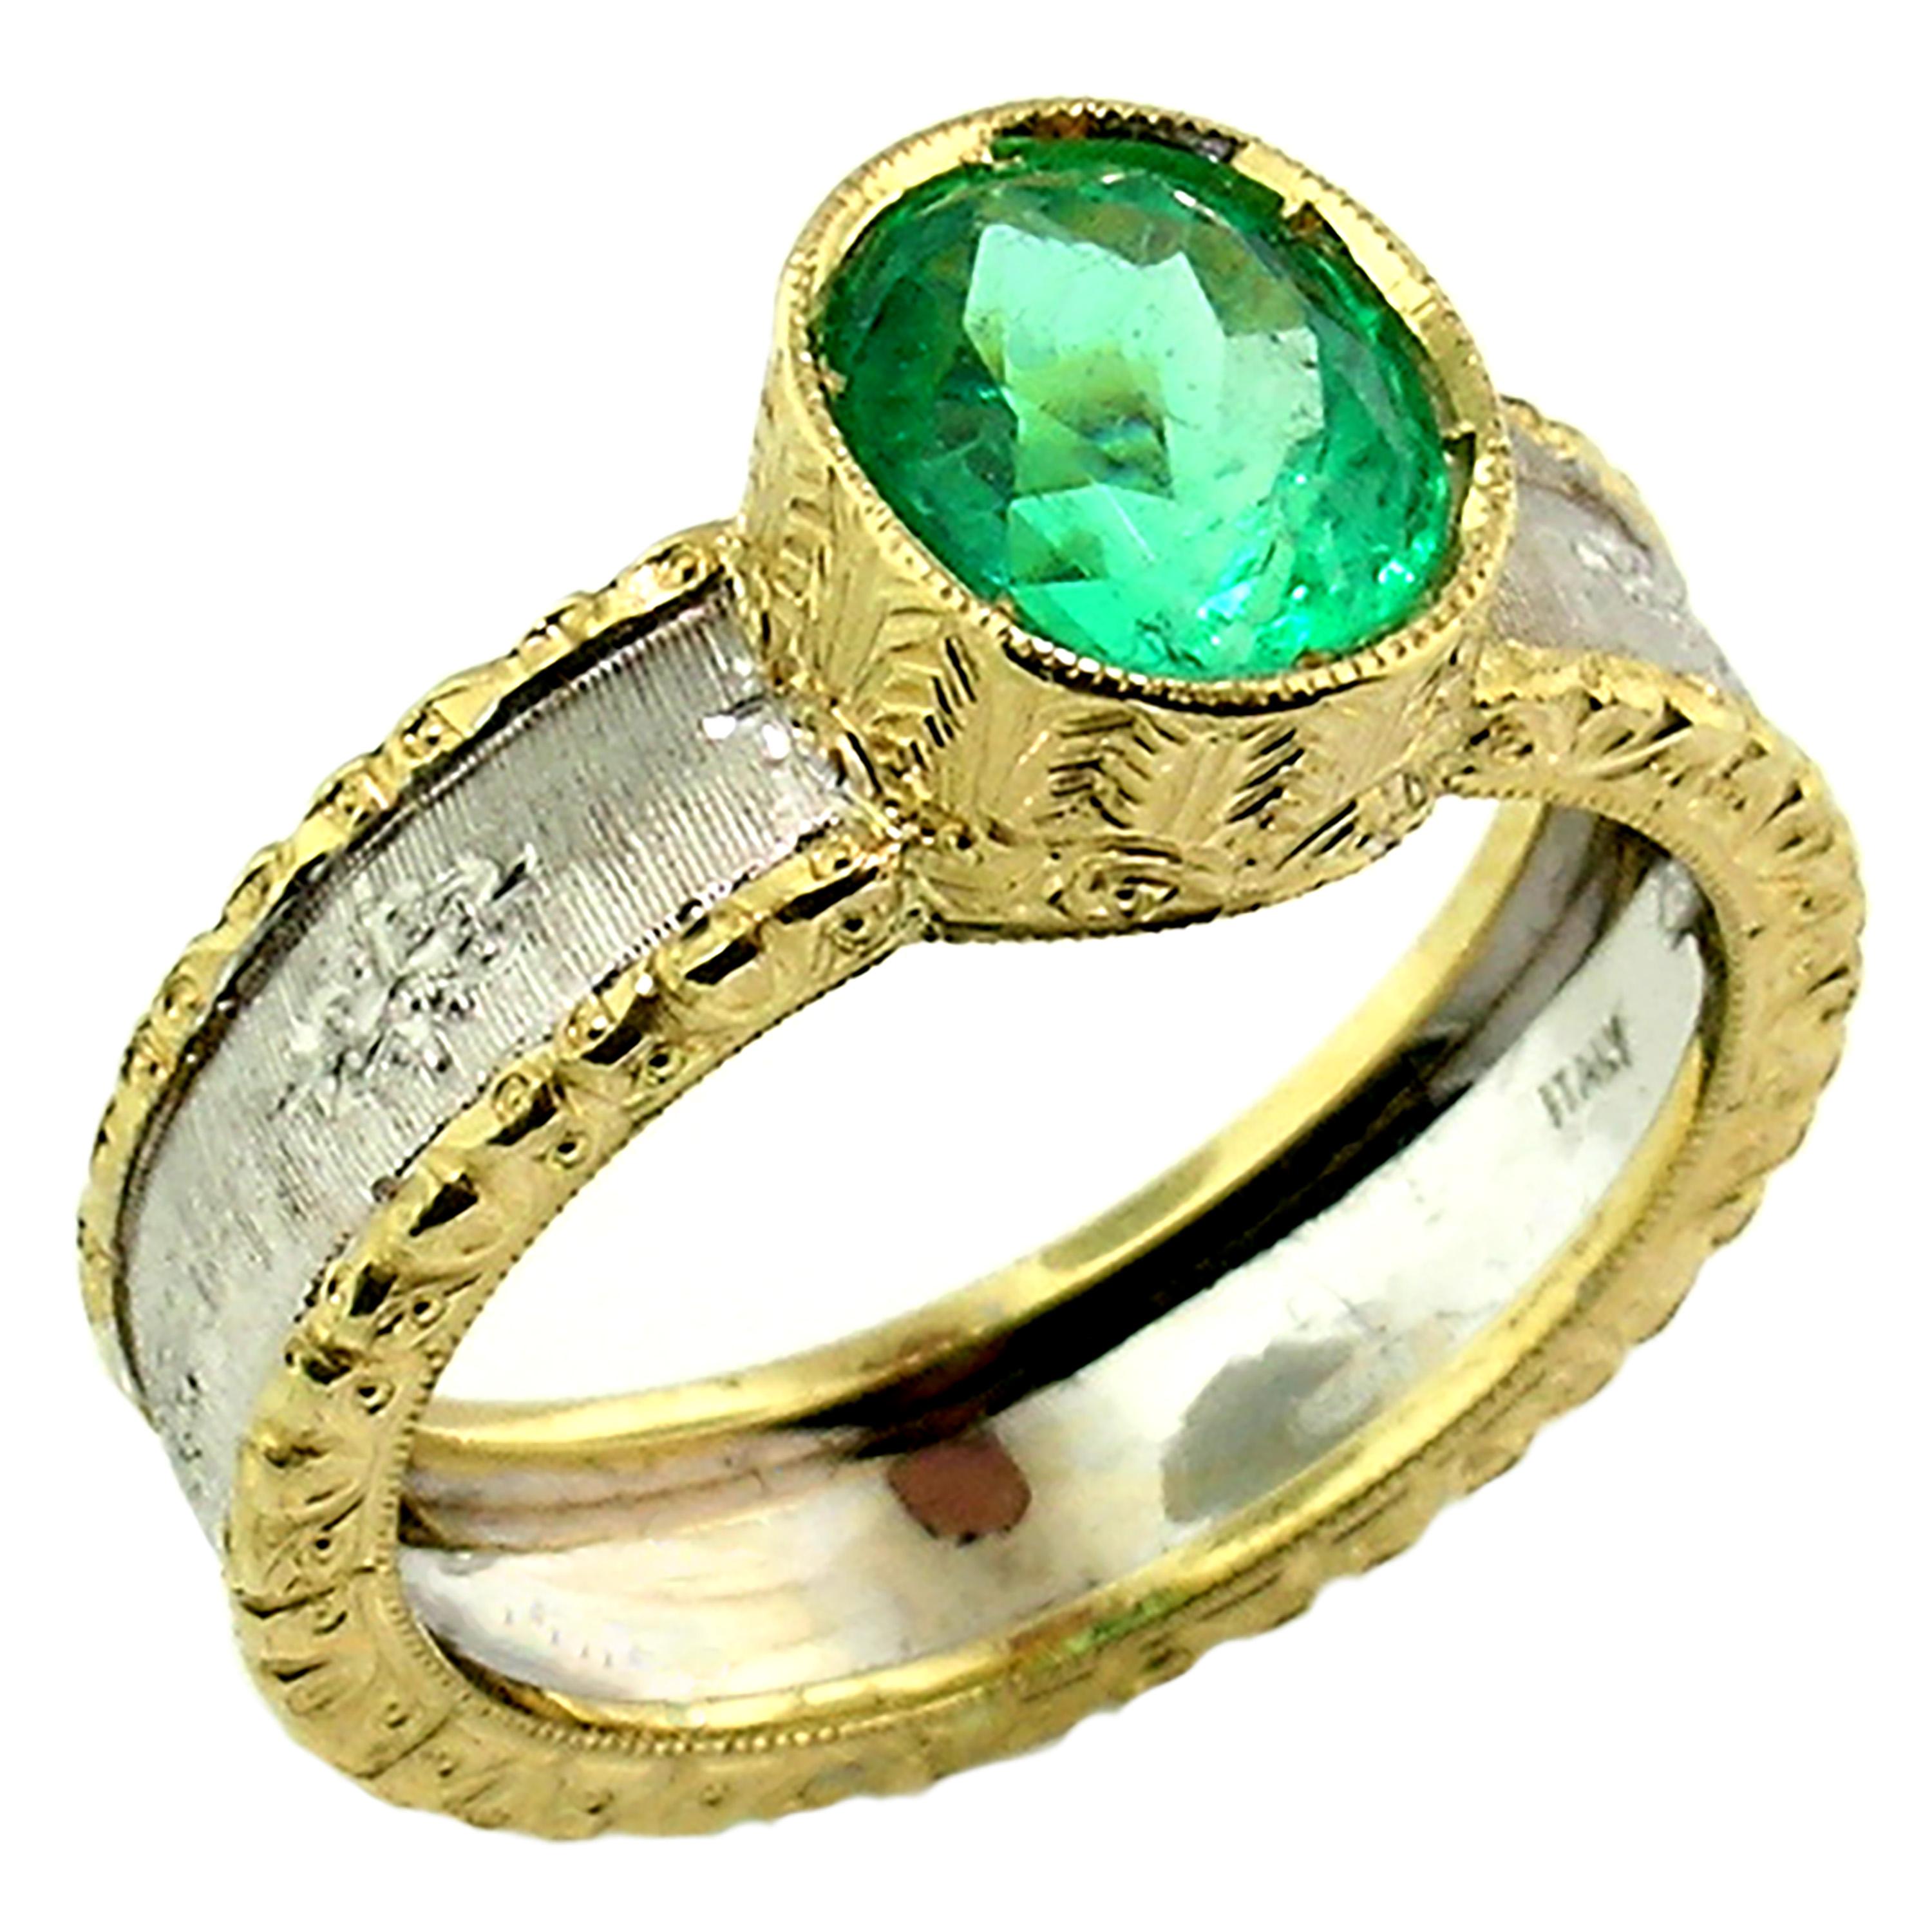 1.68ct Colombian Emerald in an 18kt Gold Ring, Handmade and Engraved in Italy